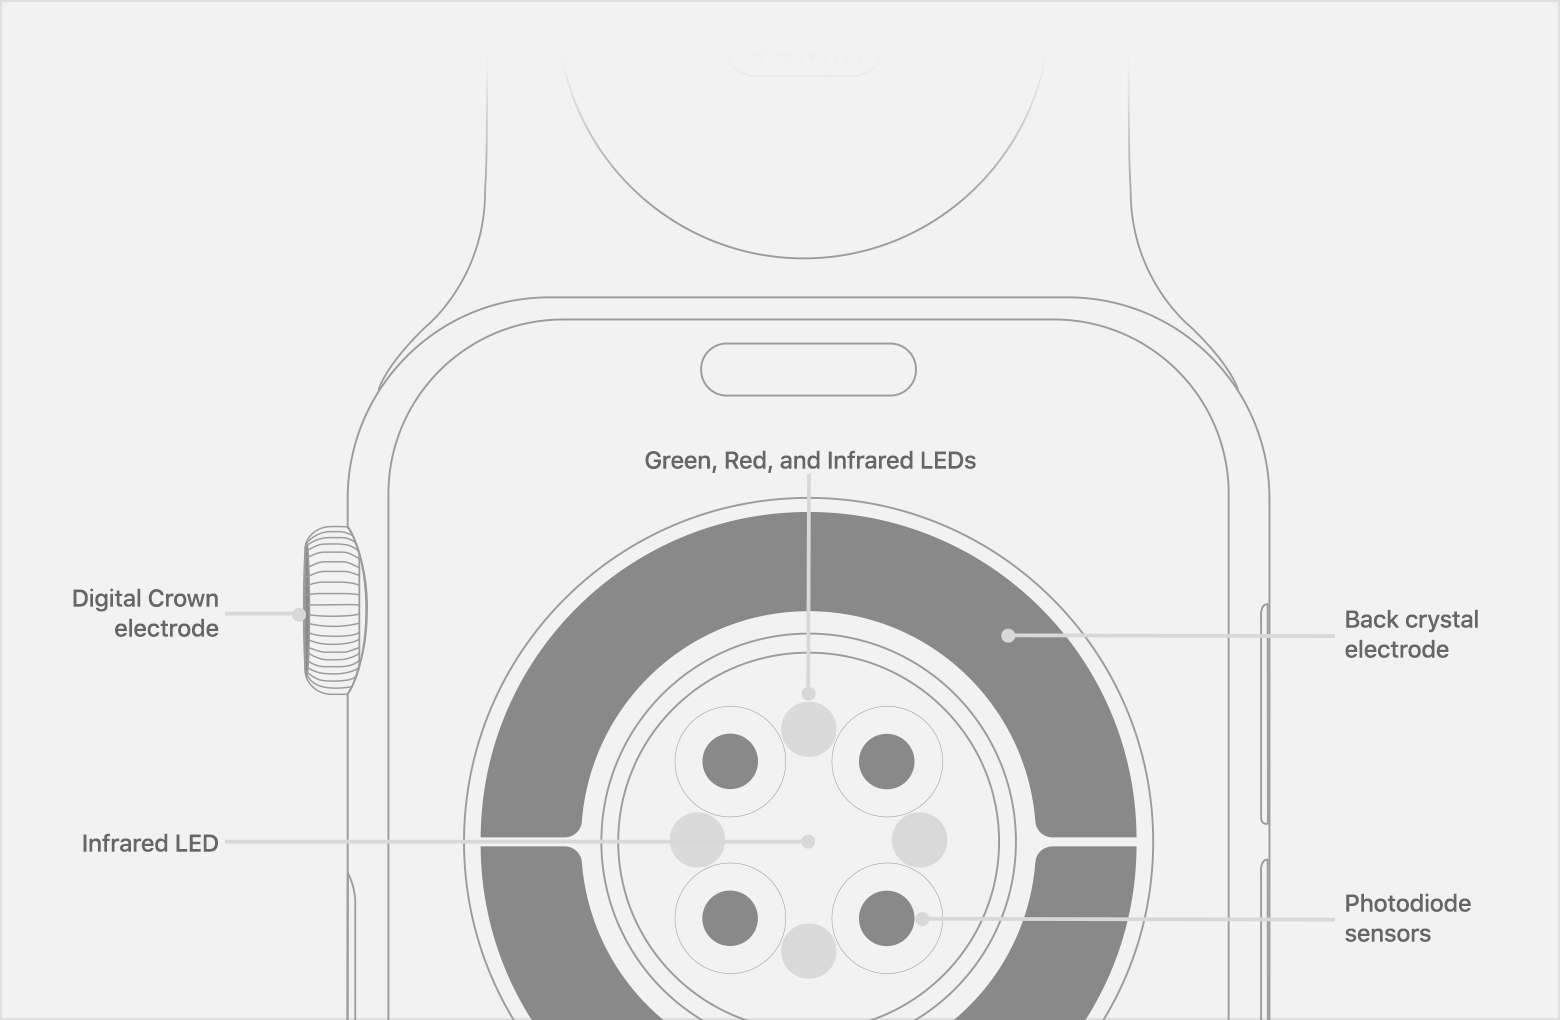 Location of Photodiode sensors, Infrared LEDs, and Green LEDs on Apple Watch Series 6.